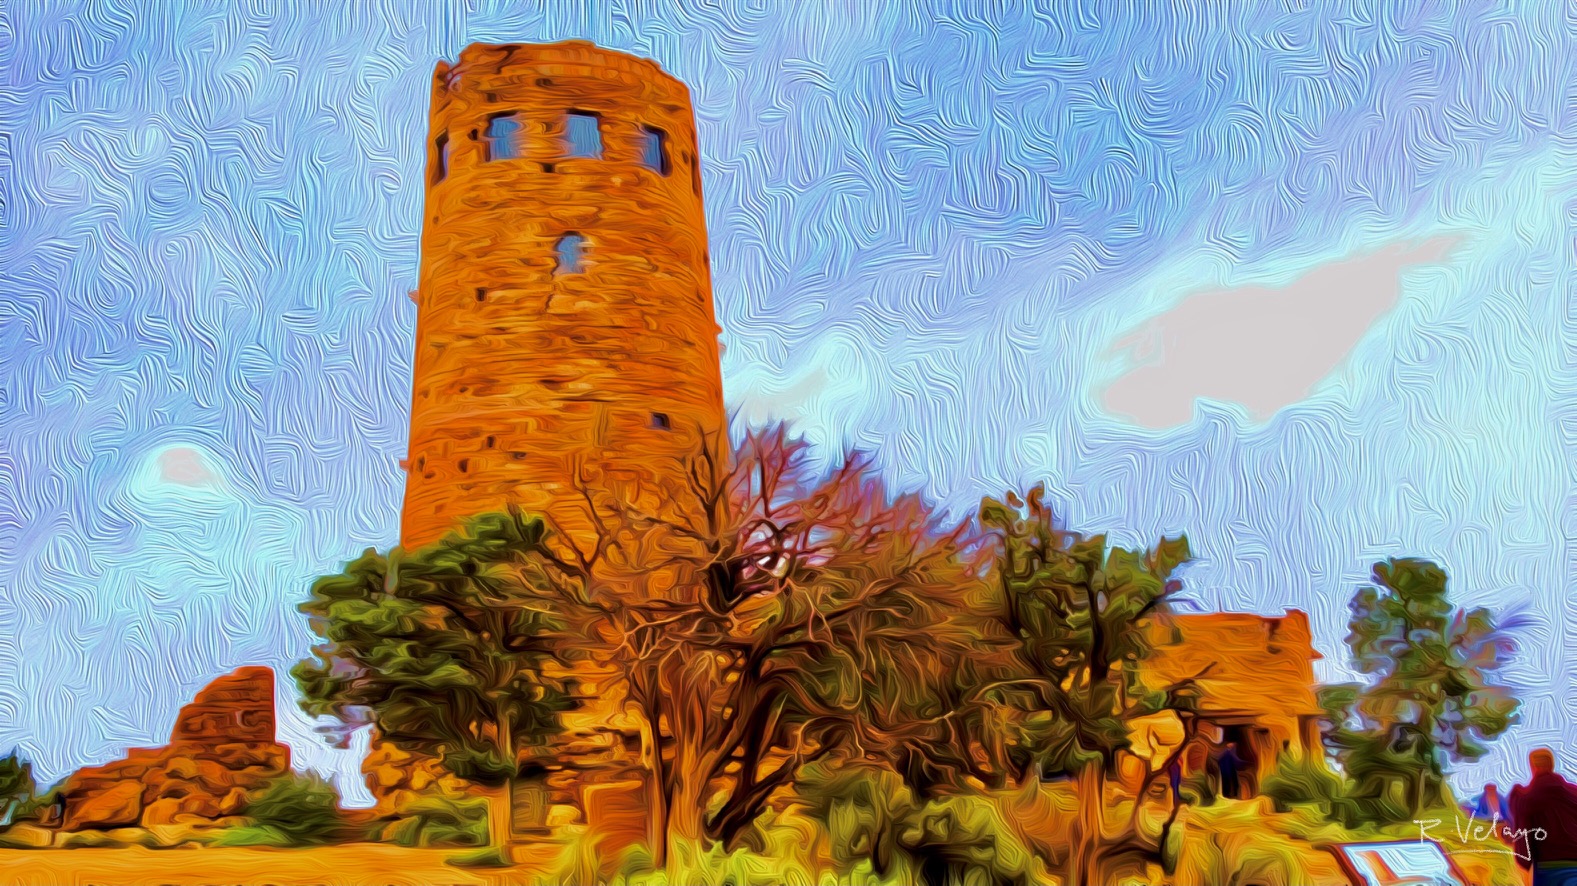 "DESERT VIEW WATCHTOWER AT THE GRAND CANYON" [Created: 4/08/2021]